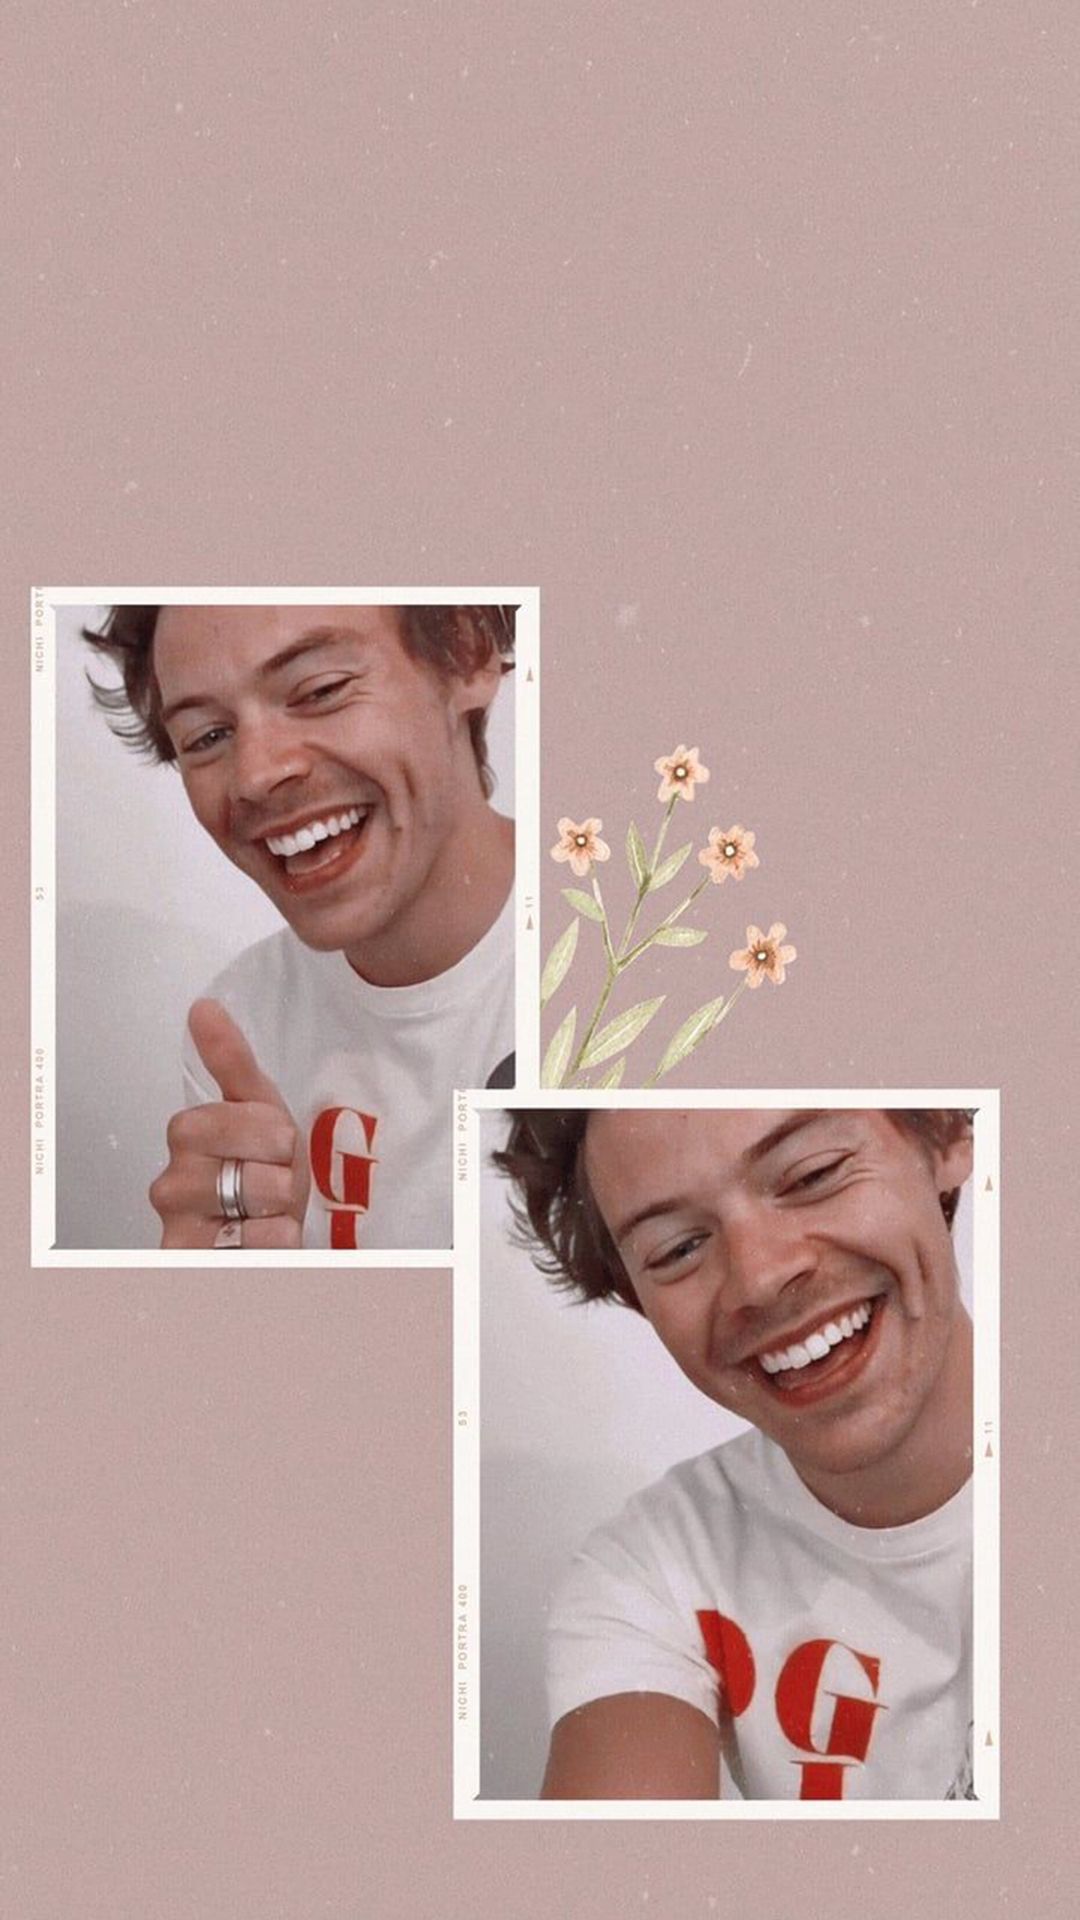 Harry Styles wallpaper for phone and desktop. - Smile, Harry Styles